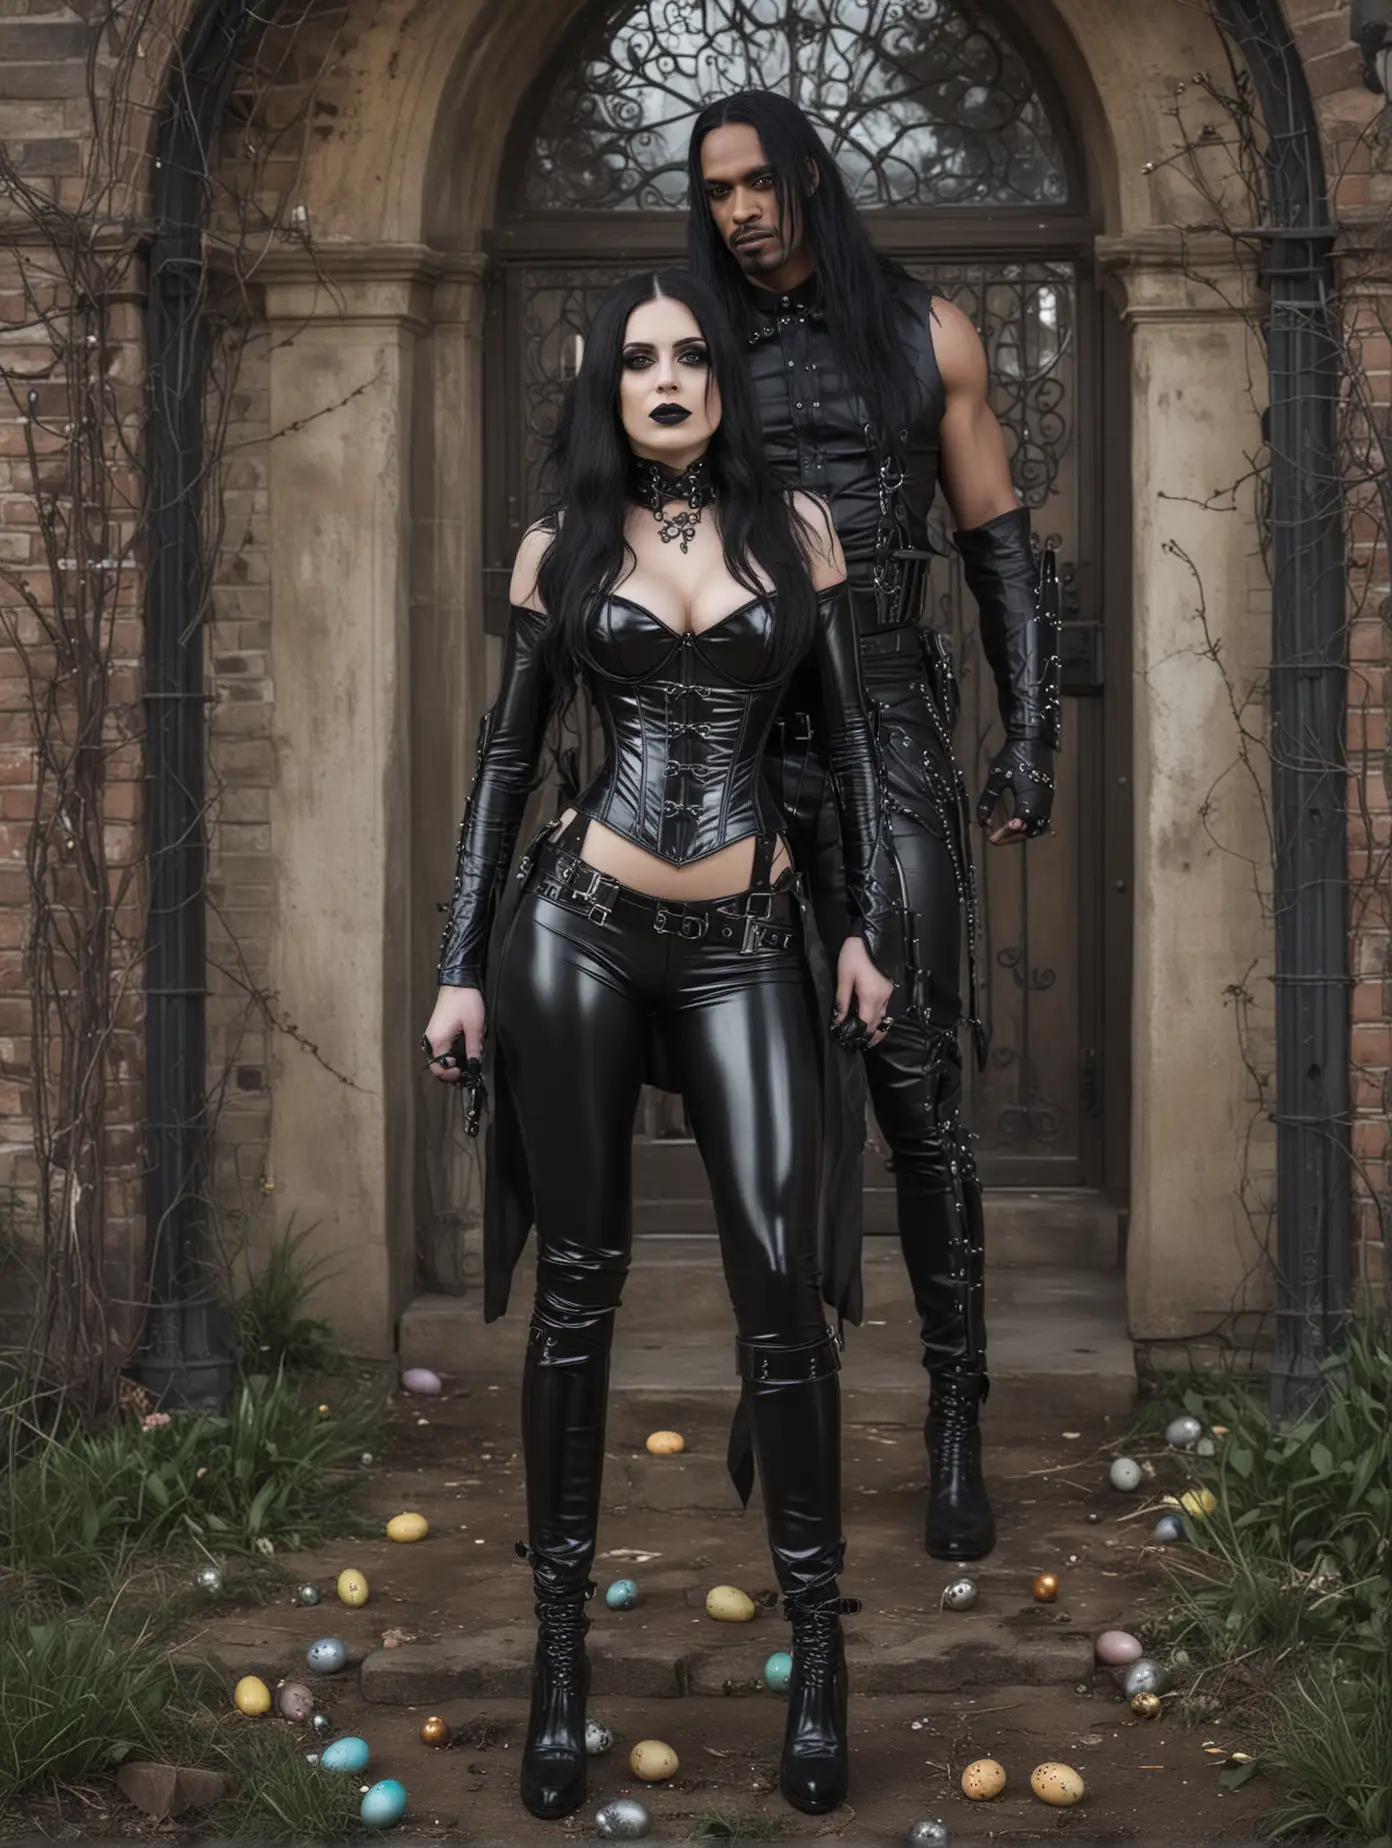 A gothic woman and a black metalhead man celebrating easter. The woman wears a latex corset and miniskirt. The man wears leather pants and a bullet belt. Both of them has long black hair, smokey eye make up and long black nails. The surrounding a dark and gothic setting. 